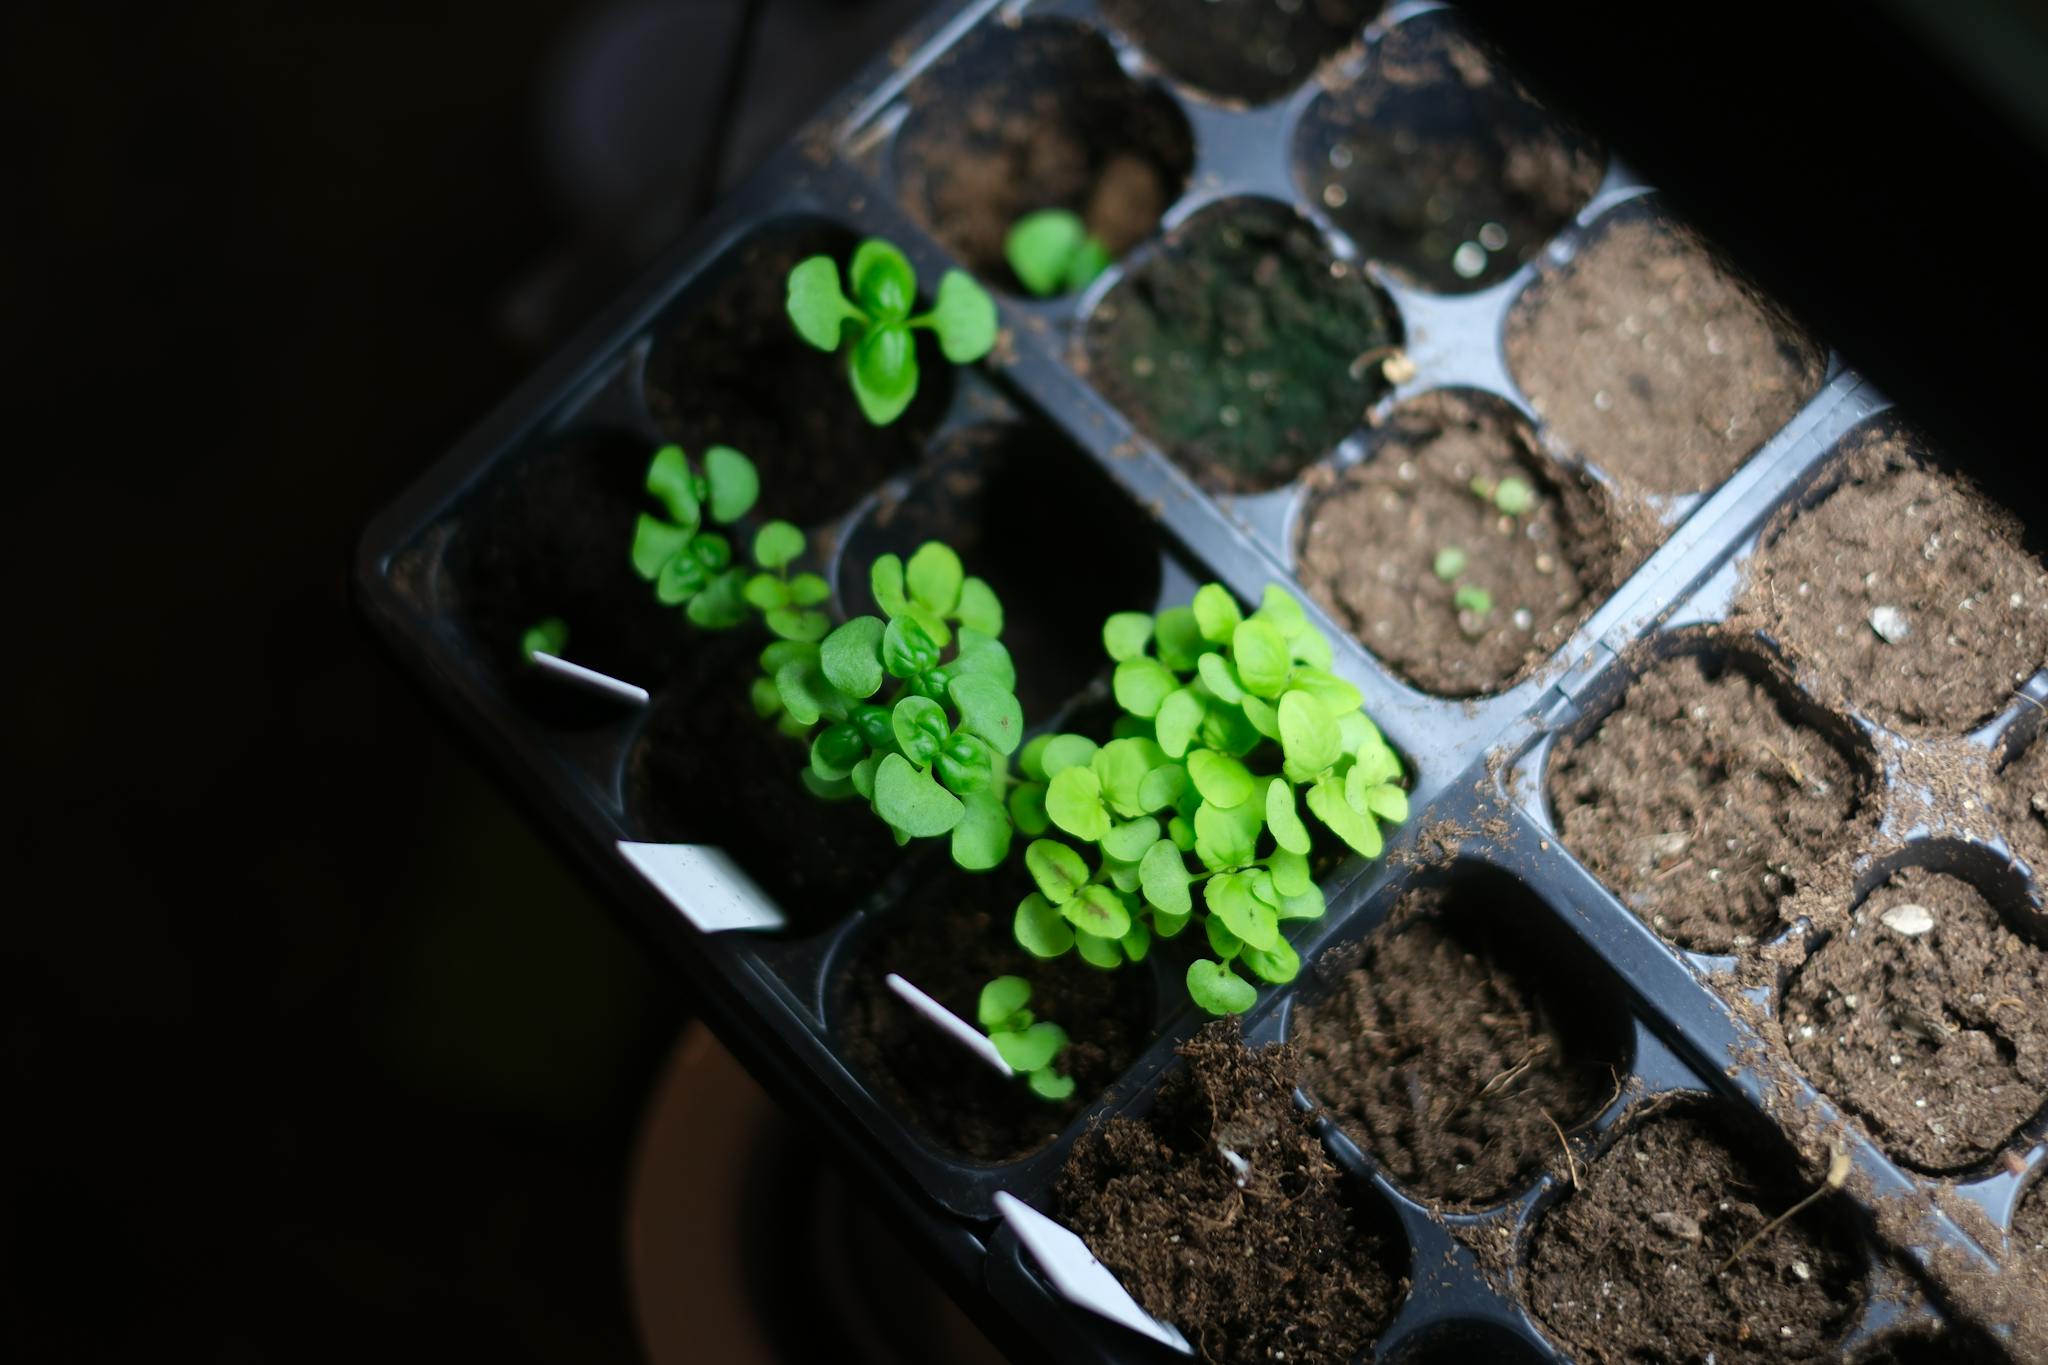 A seedling tray with young green plants and a few empty cells, apparently taken in a dark environment with a focused light source on the foliage